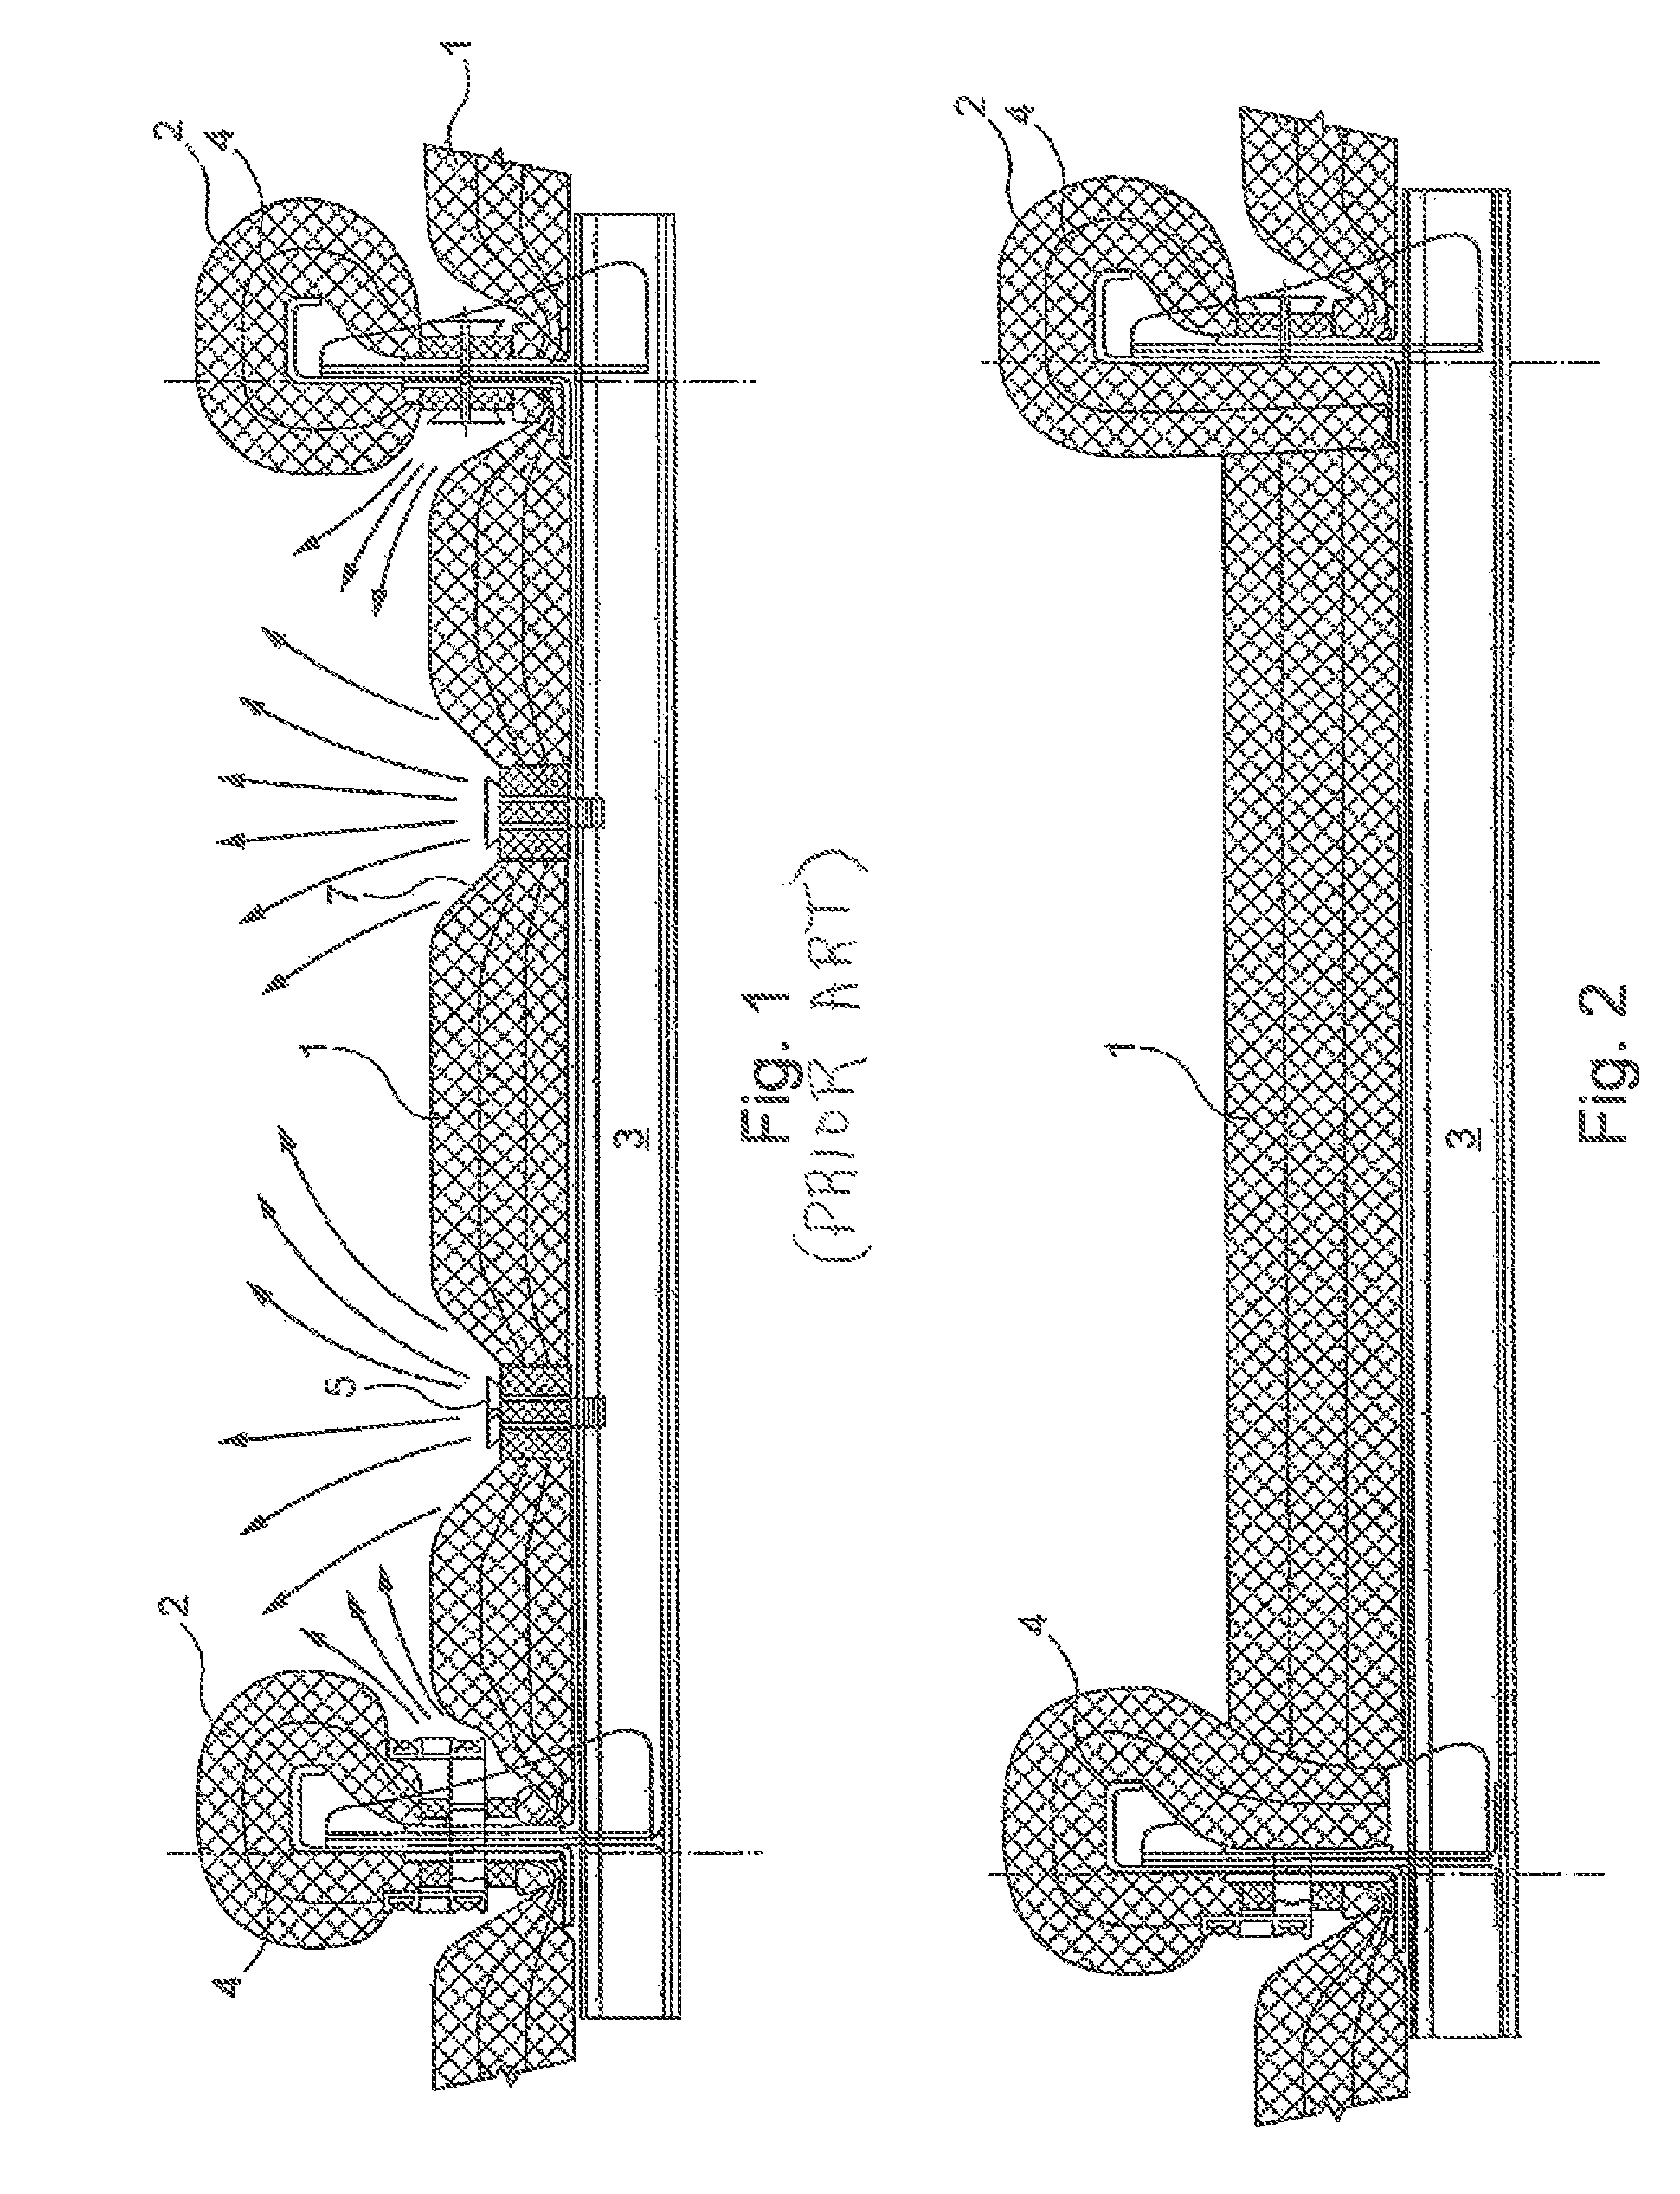 Insulation of an aircraft fuselage structure